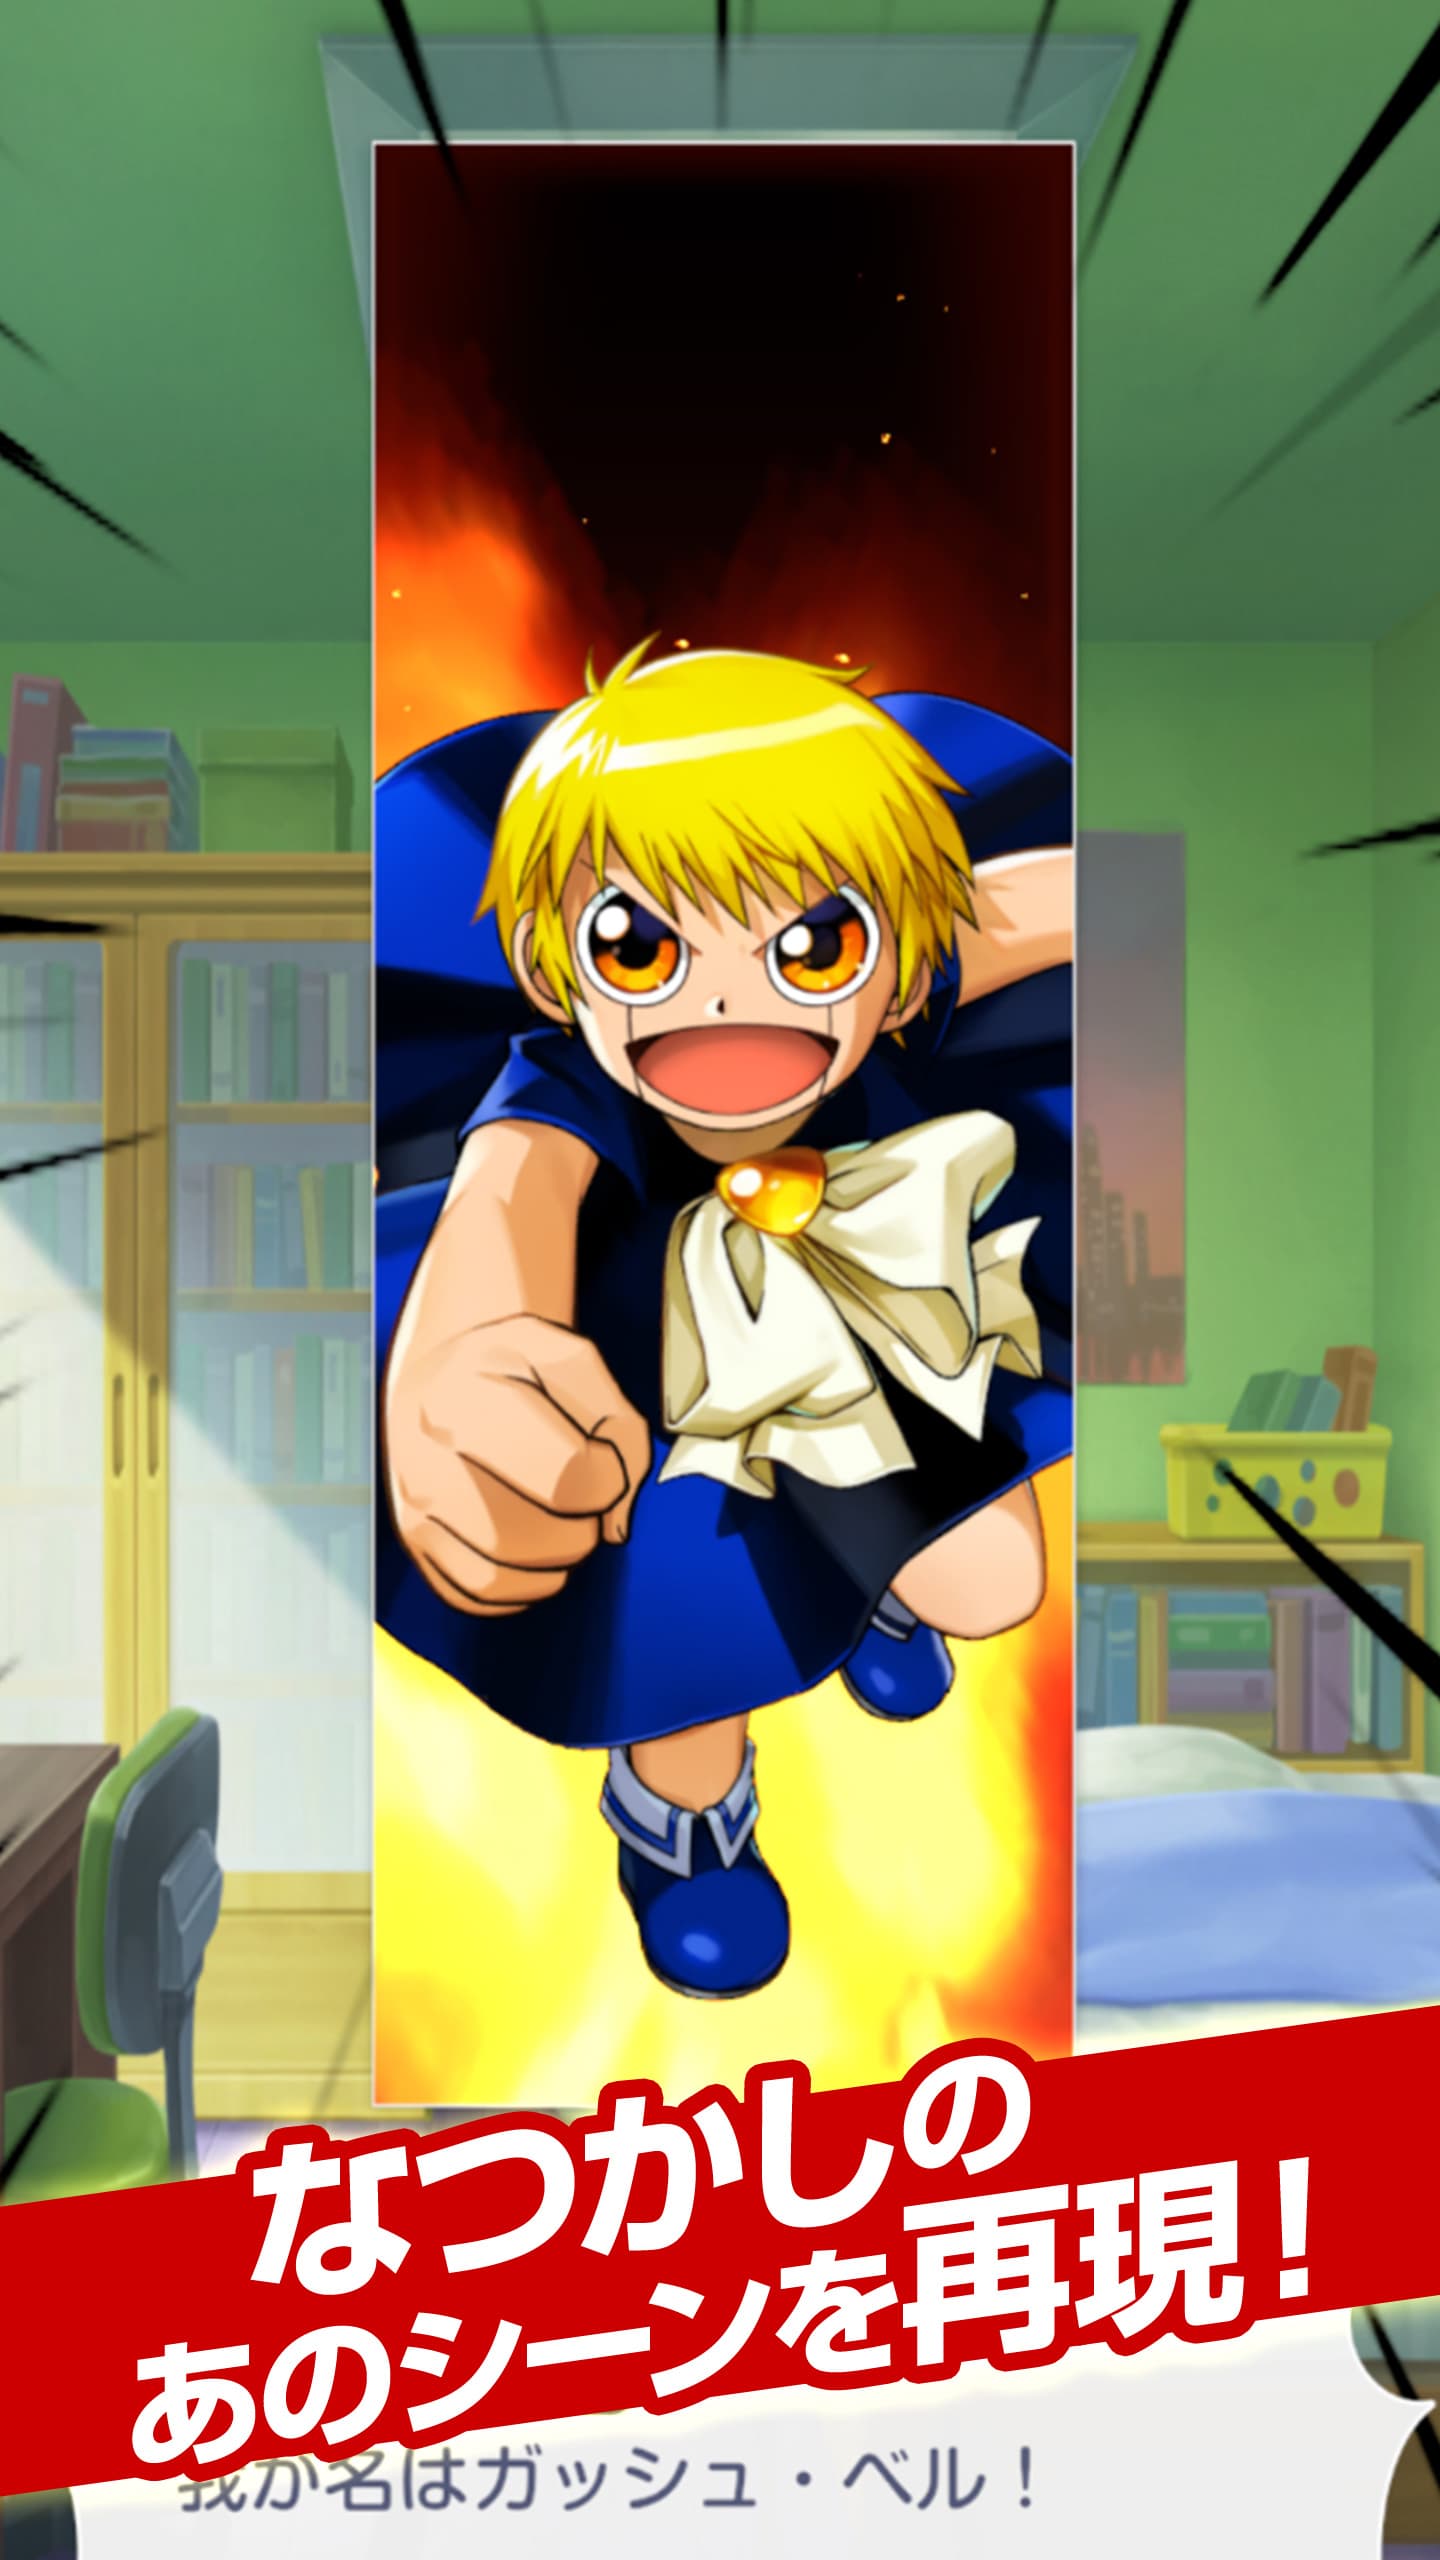 Zatch Bell Smartphone Game Revealed for Anime's 20th Anniversary